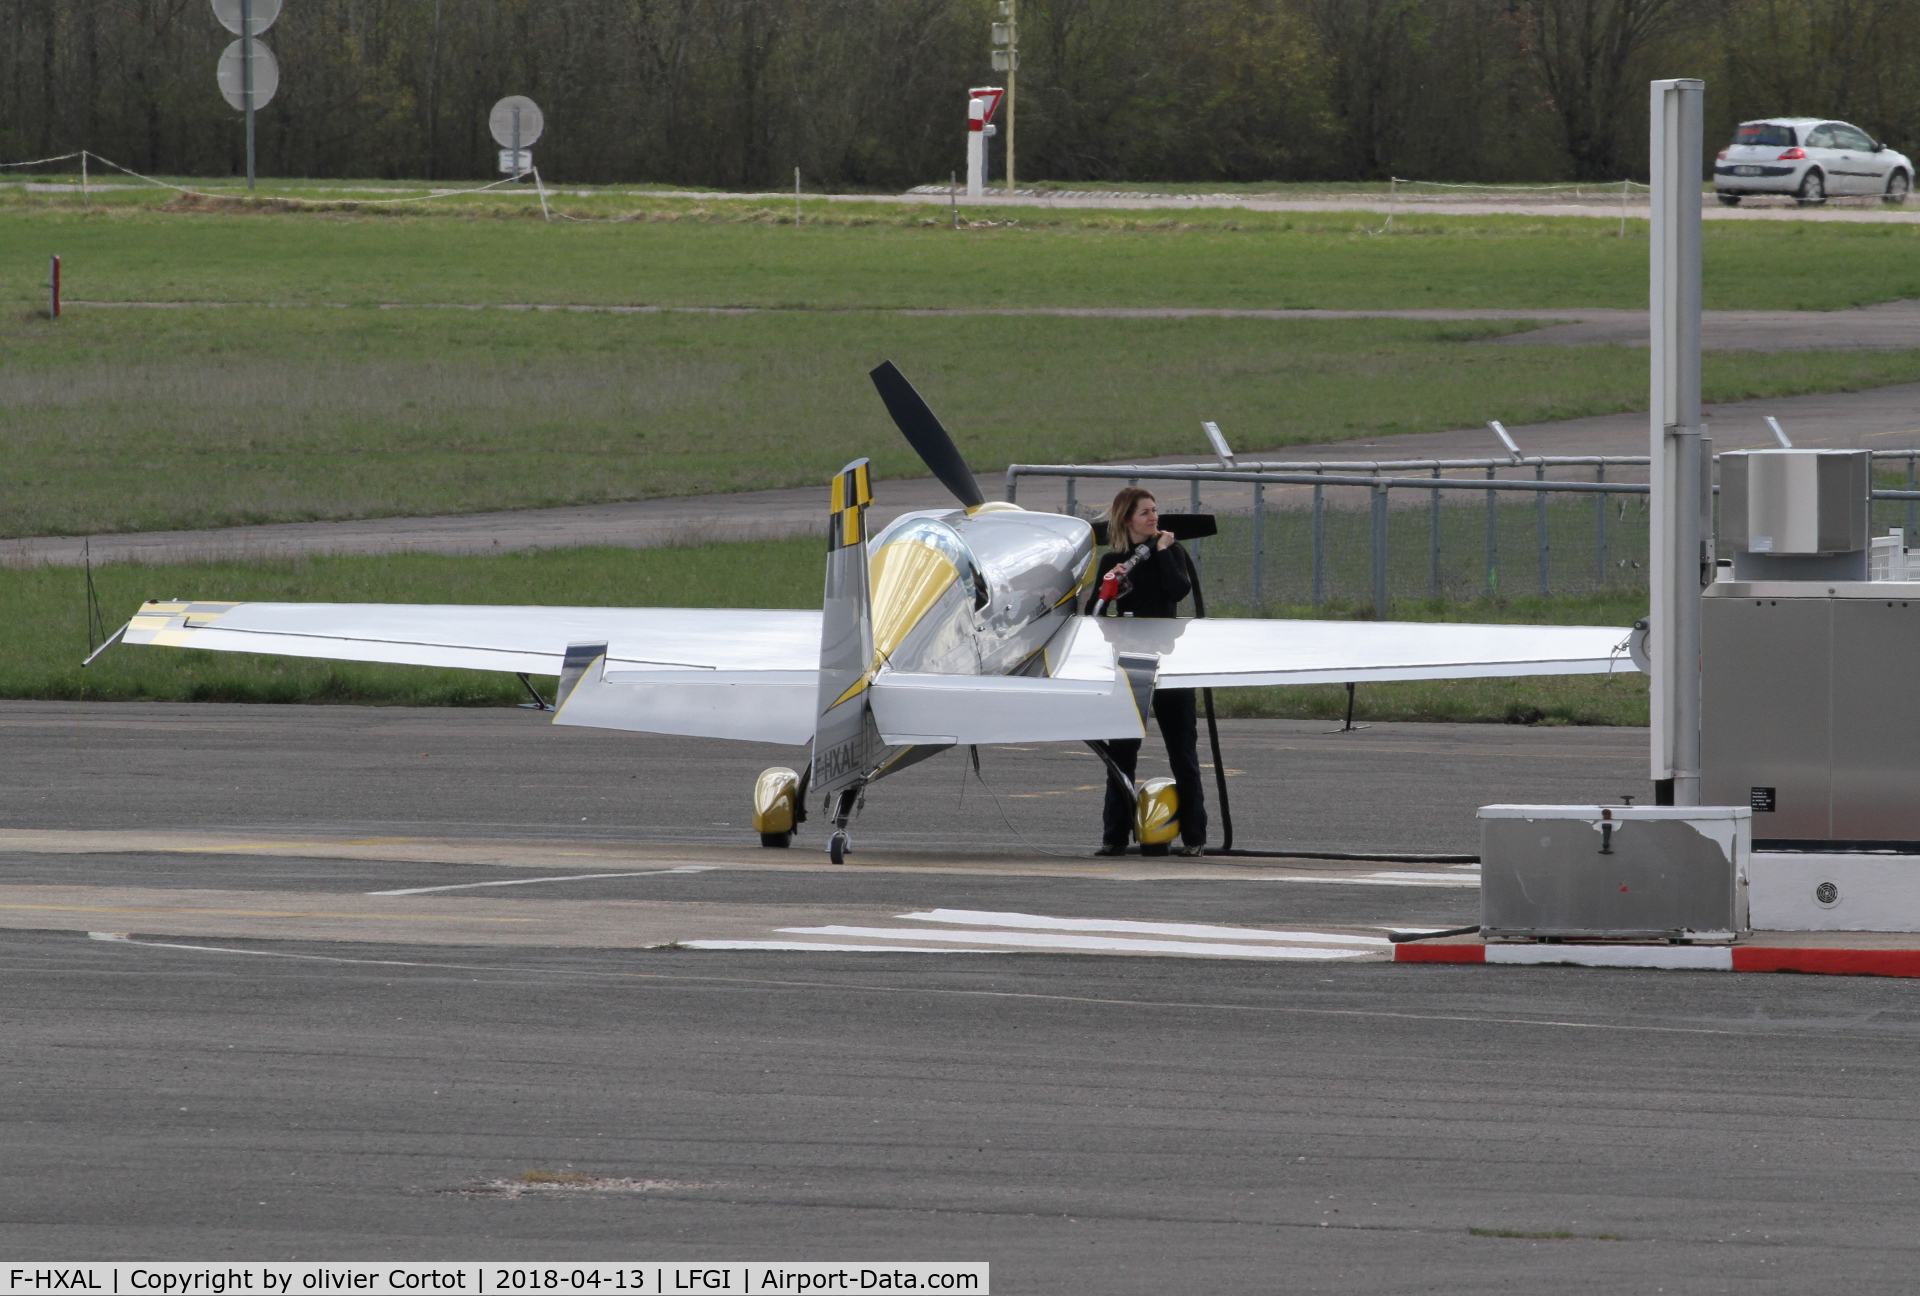 F-HXAL, Extra EA-300SC C/N SC047, Refuelling at Darois airport ; no more Breitling sponsorship ?